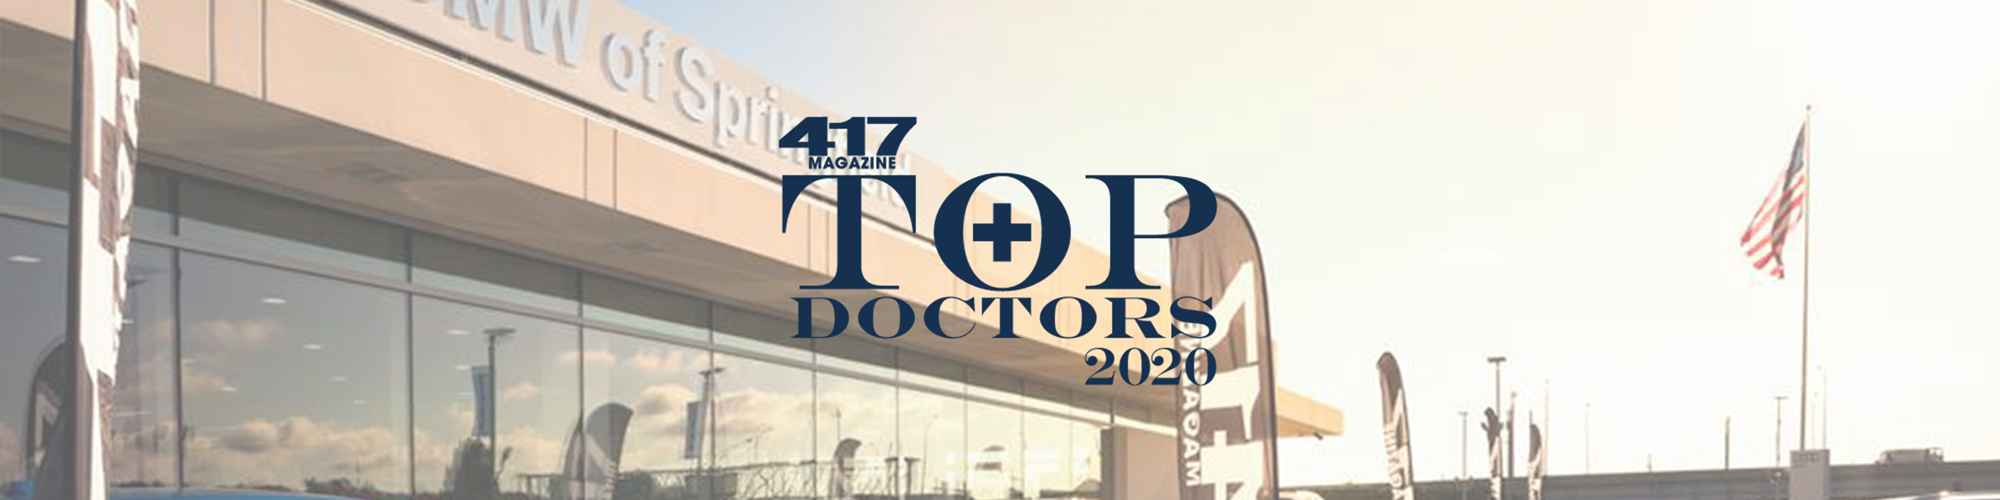 RSVP to the 2020 Top Doctors Reception